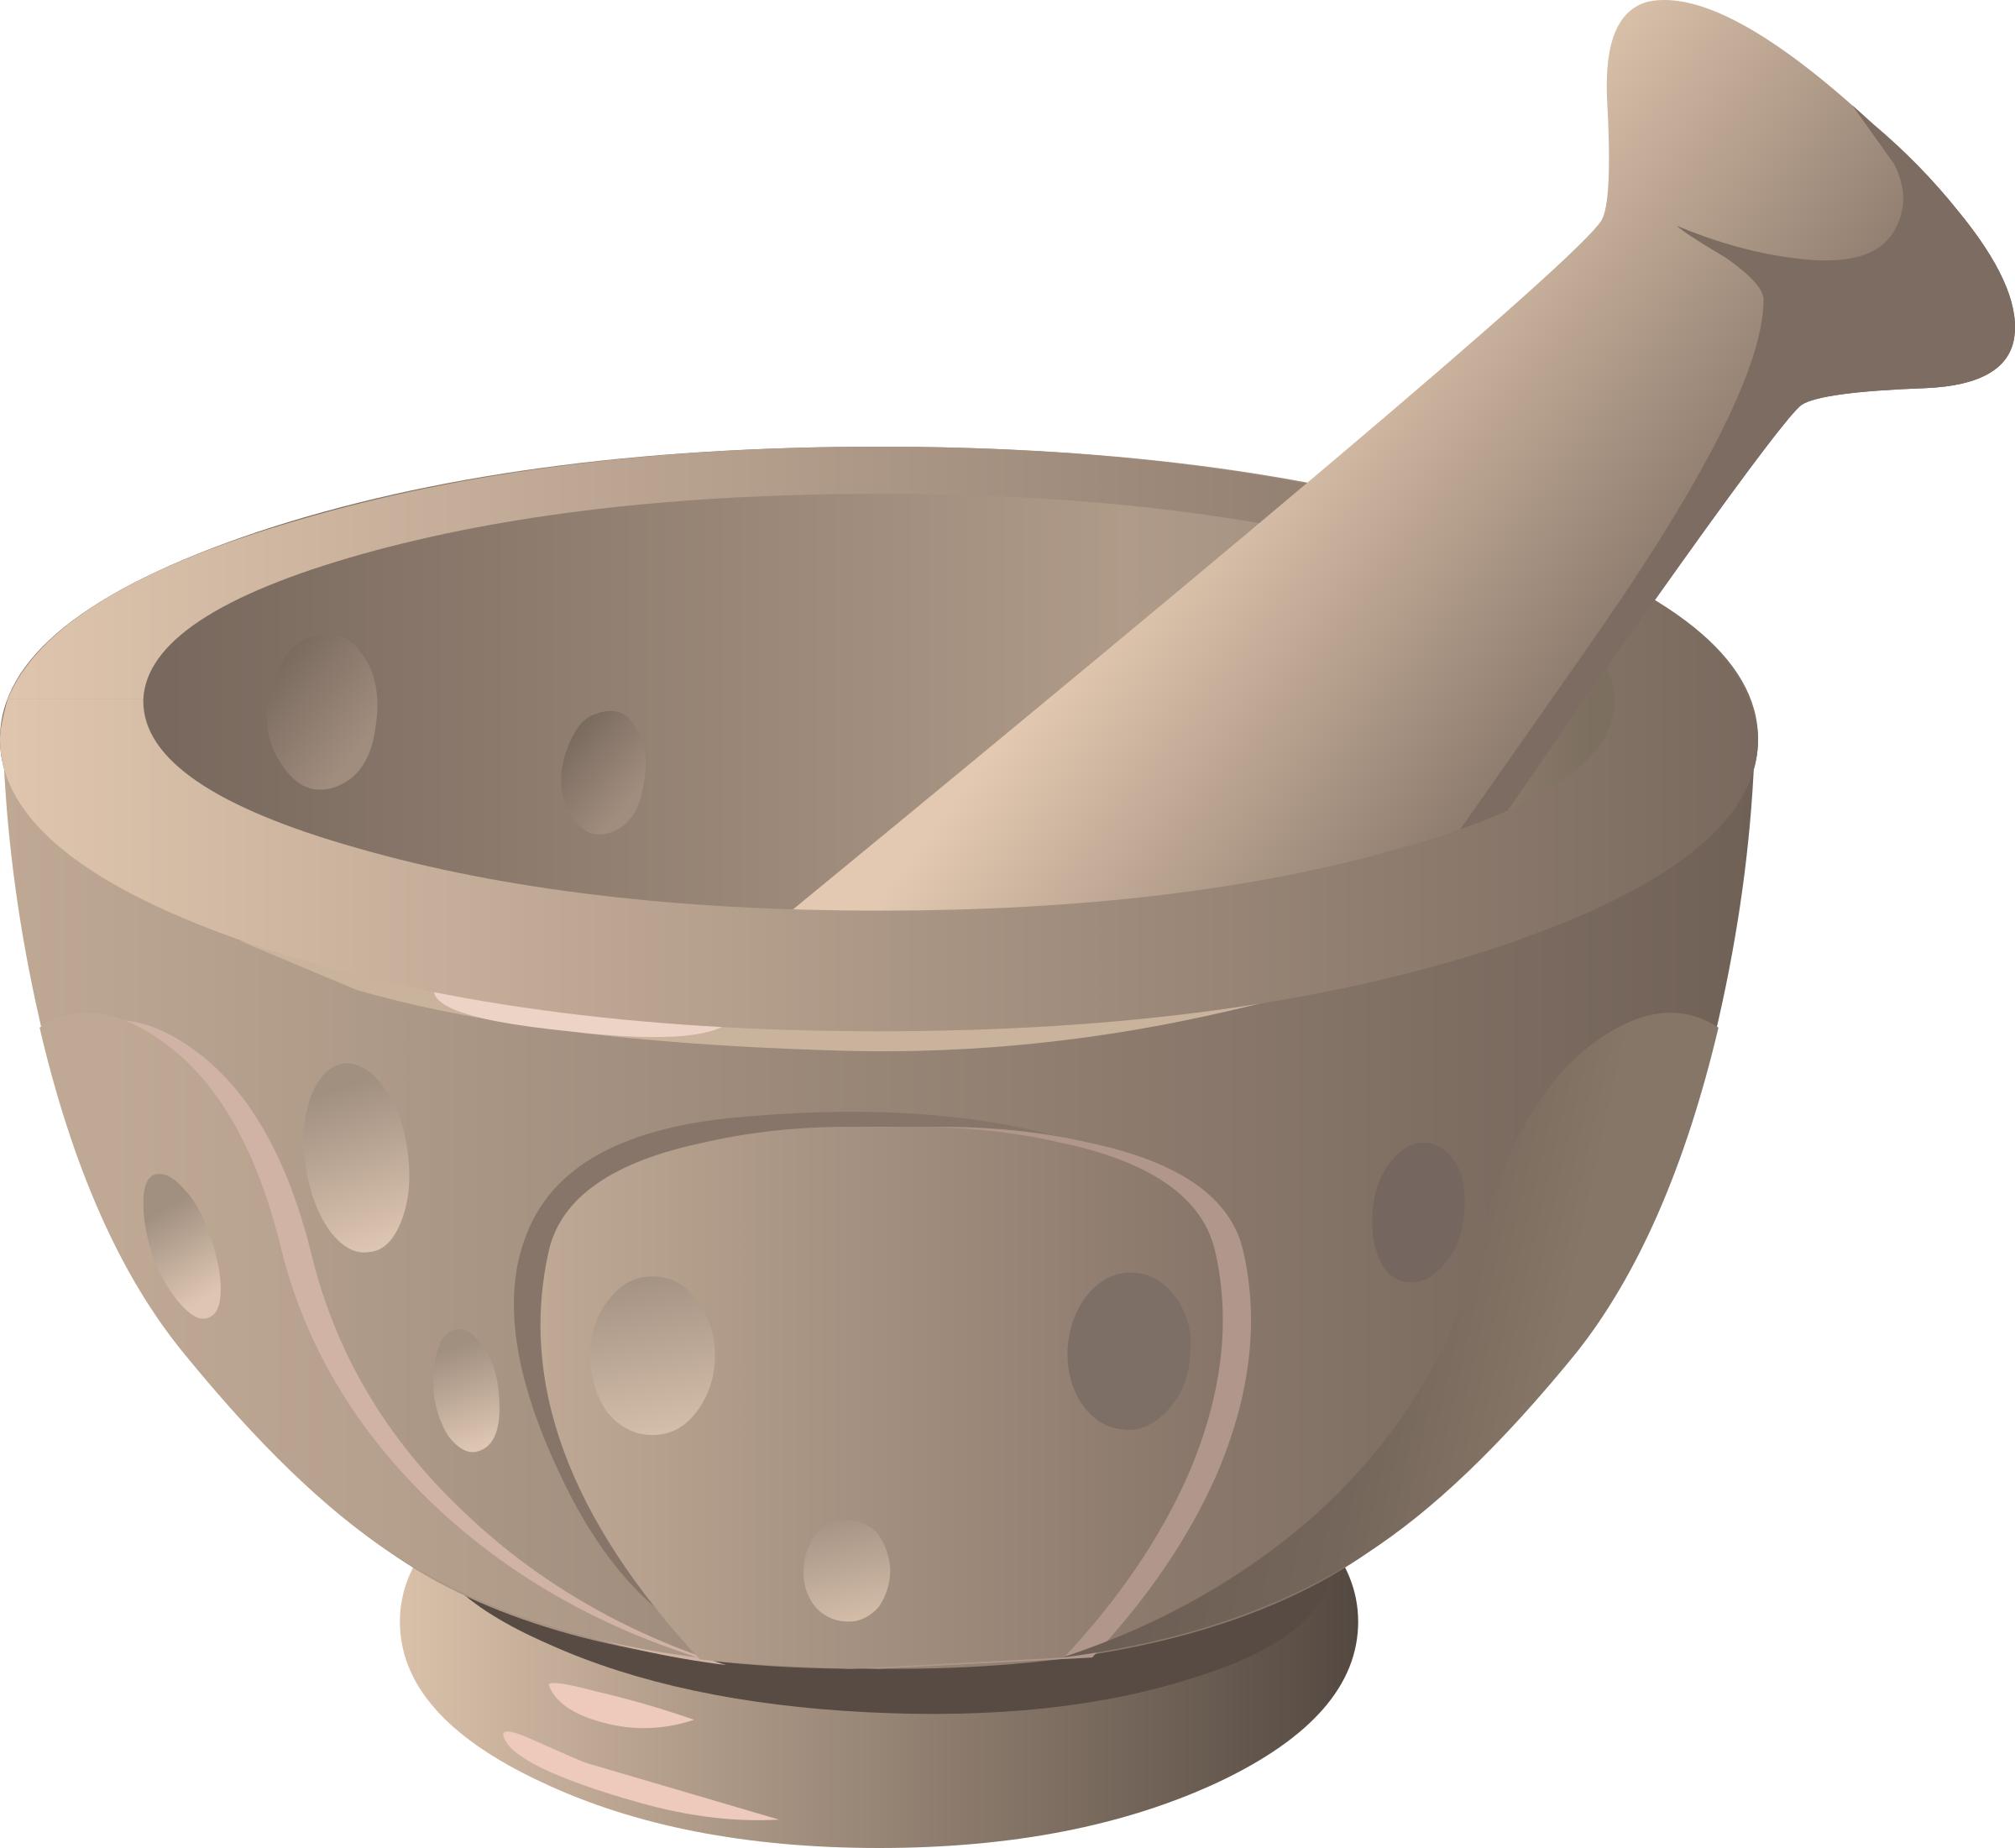 Tools Mortar And Pestle png